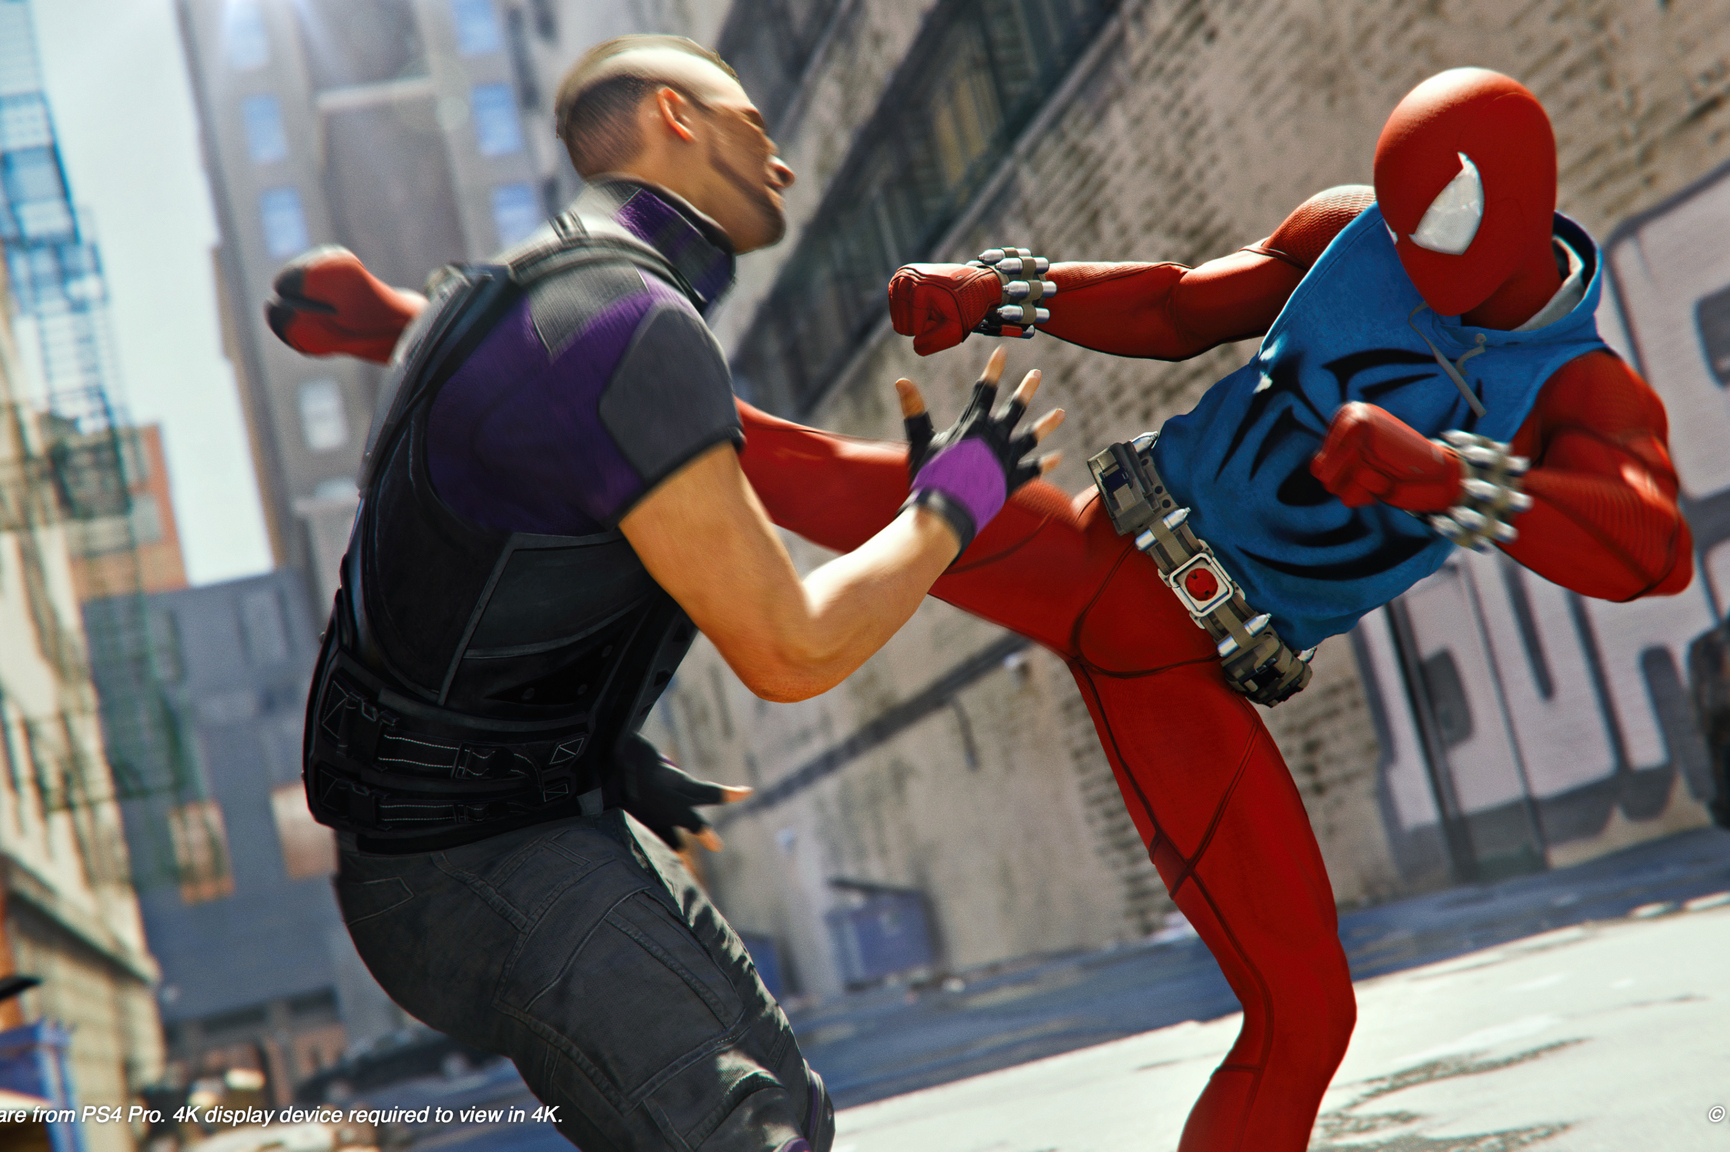 How bad do you think a punch from either Spider-Men would feel when they  are not pulling their punches? : r/SpidermanPS4